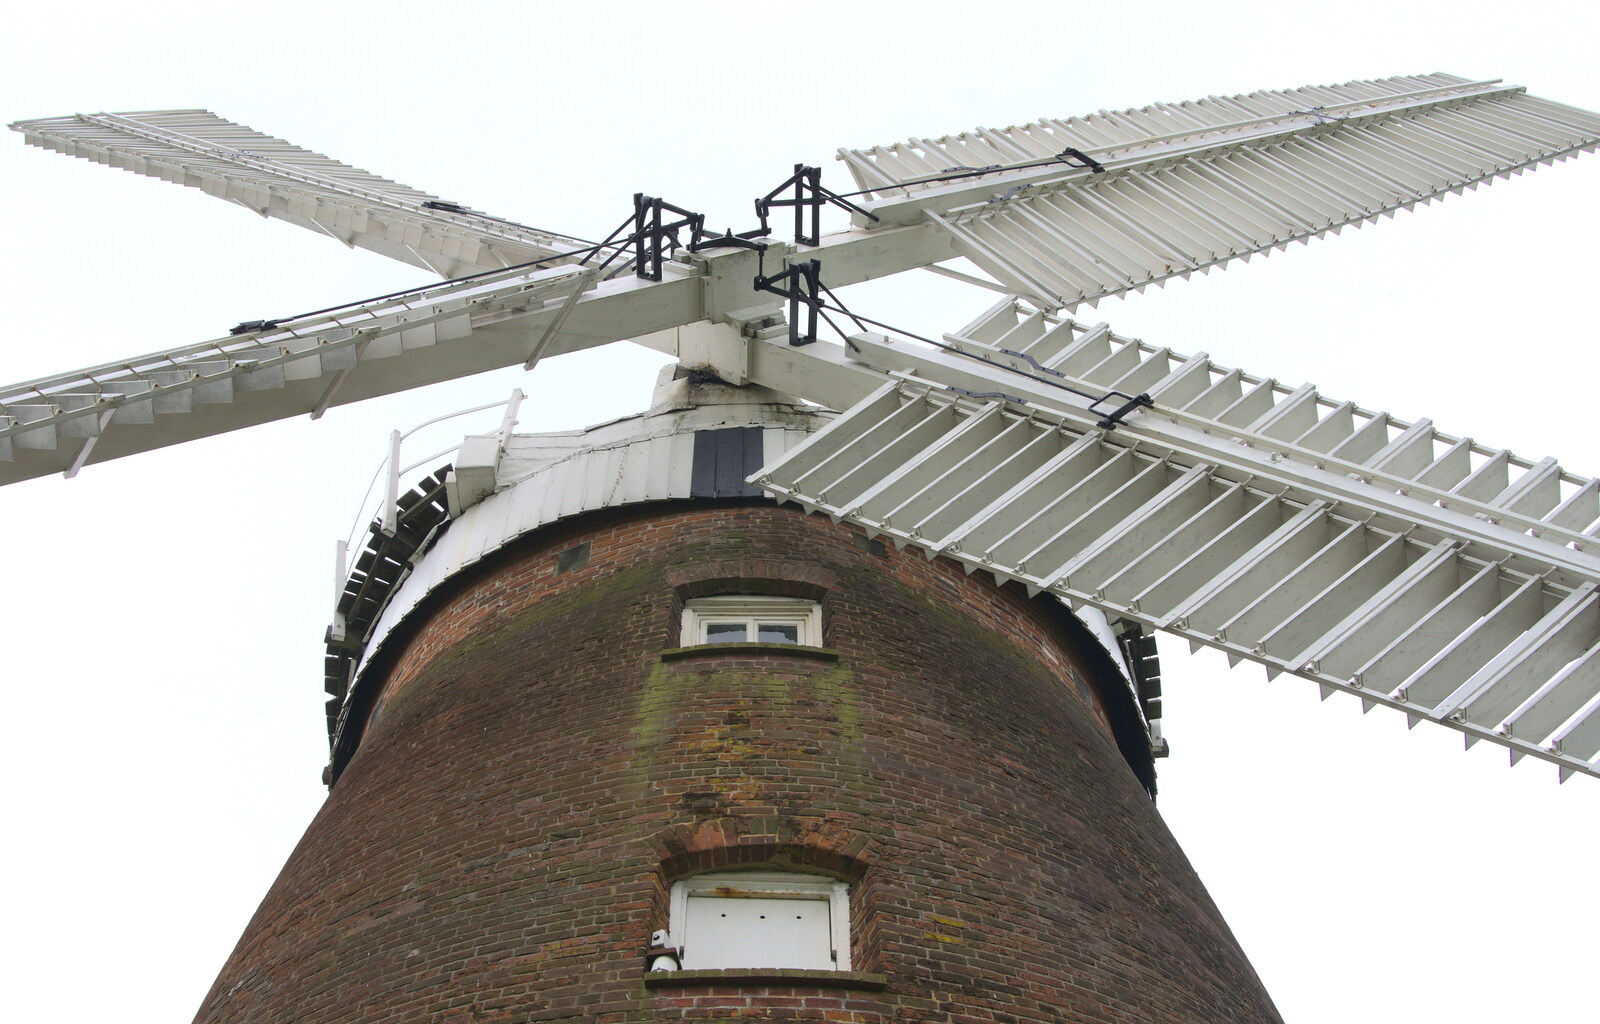 The sails of John Webb's windmill from A Postcard From Thaxted, Essex - 7th May 2017